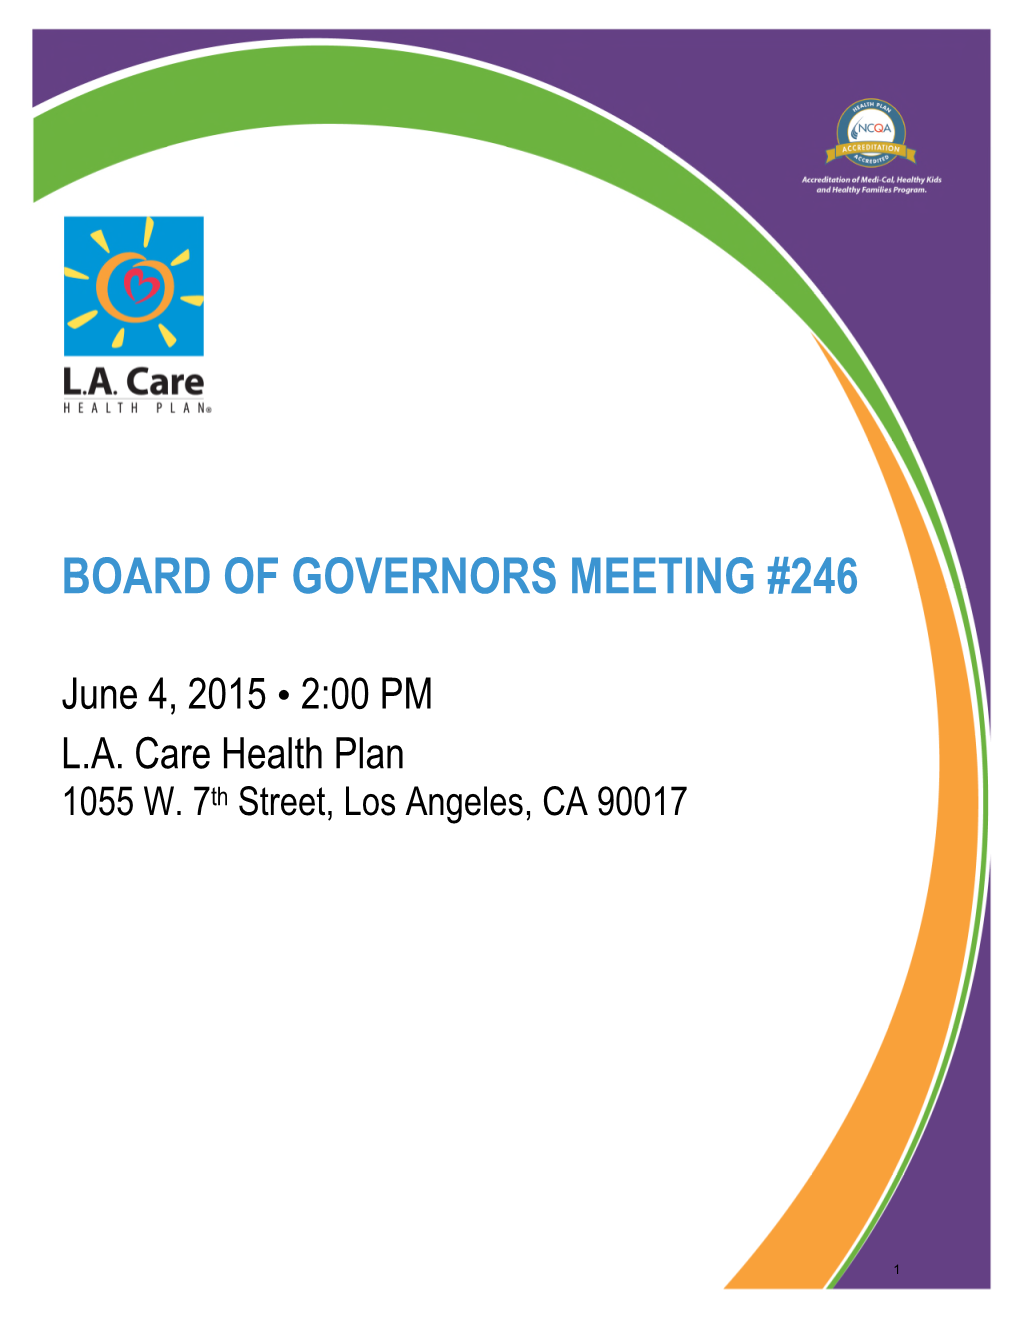 Board of Governors Meeting #246